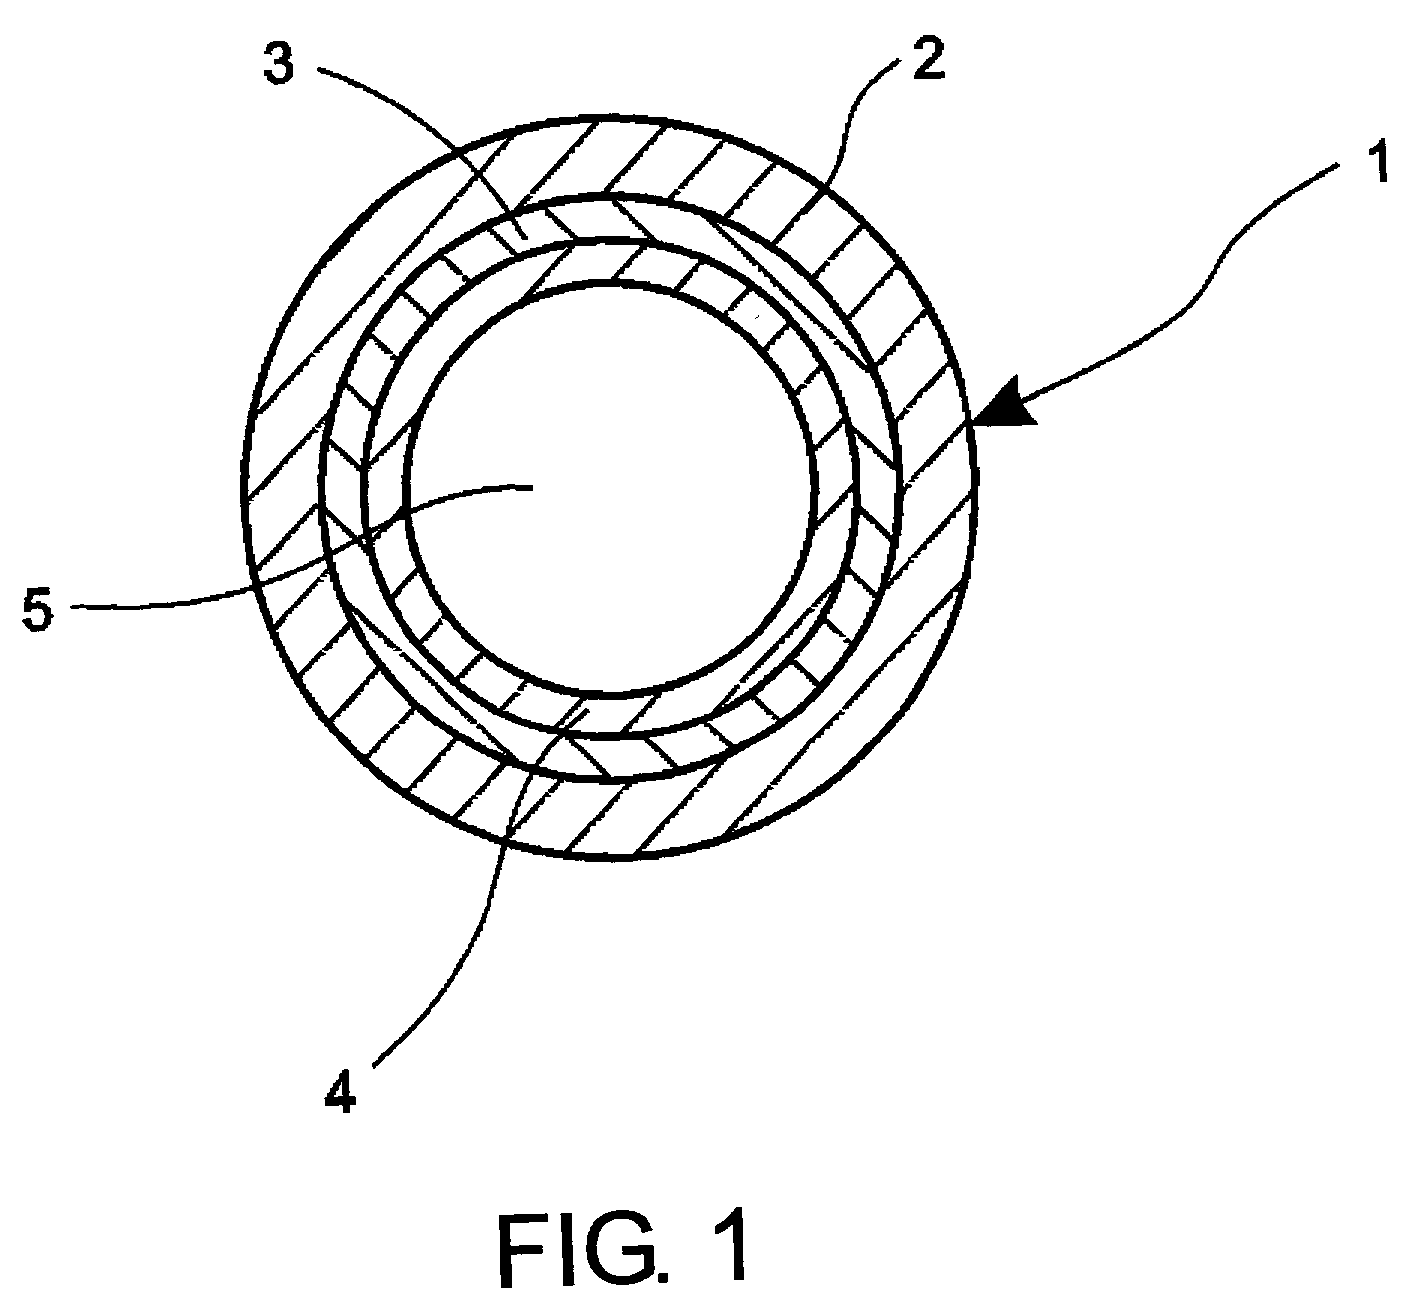 Method for making hollow glass optical waveguide